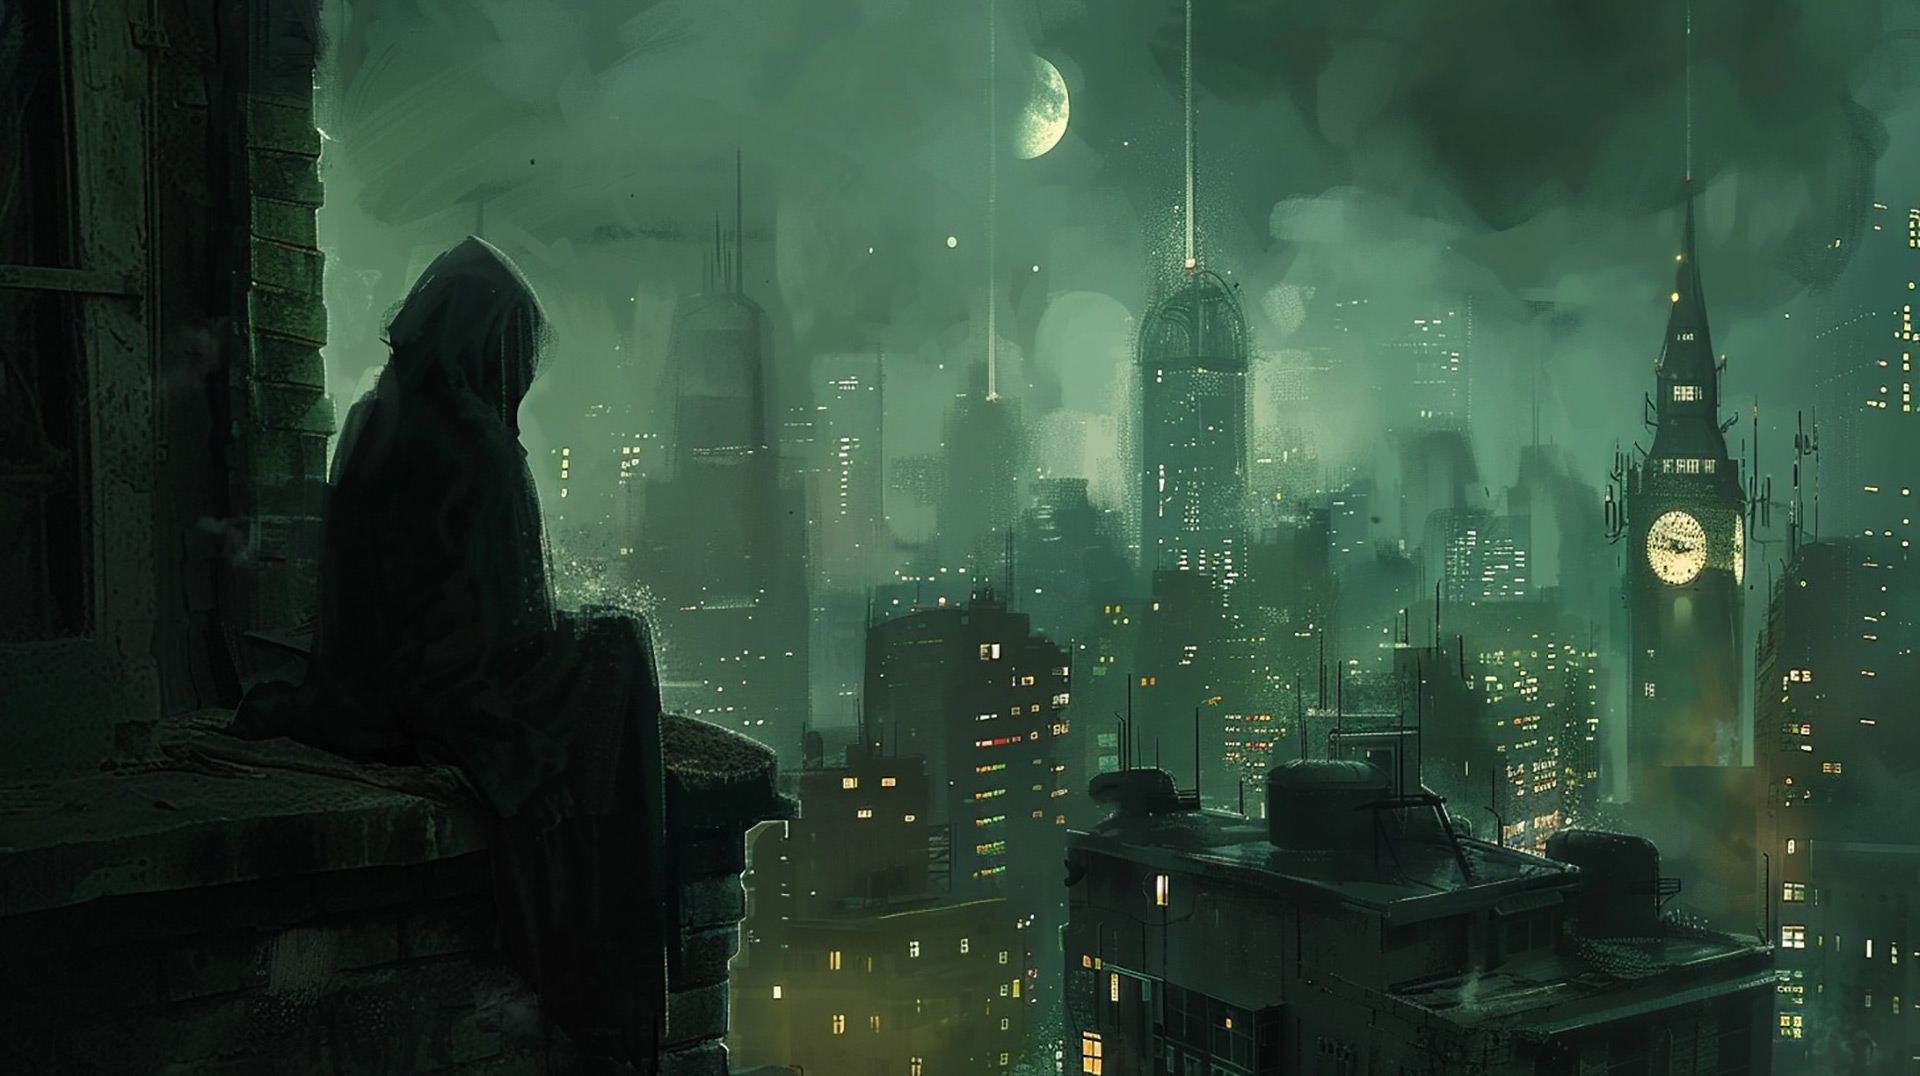 Silent Streets: Mysterious Death in the City Wallpapers